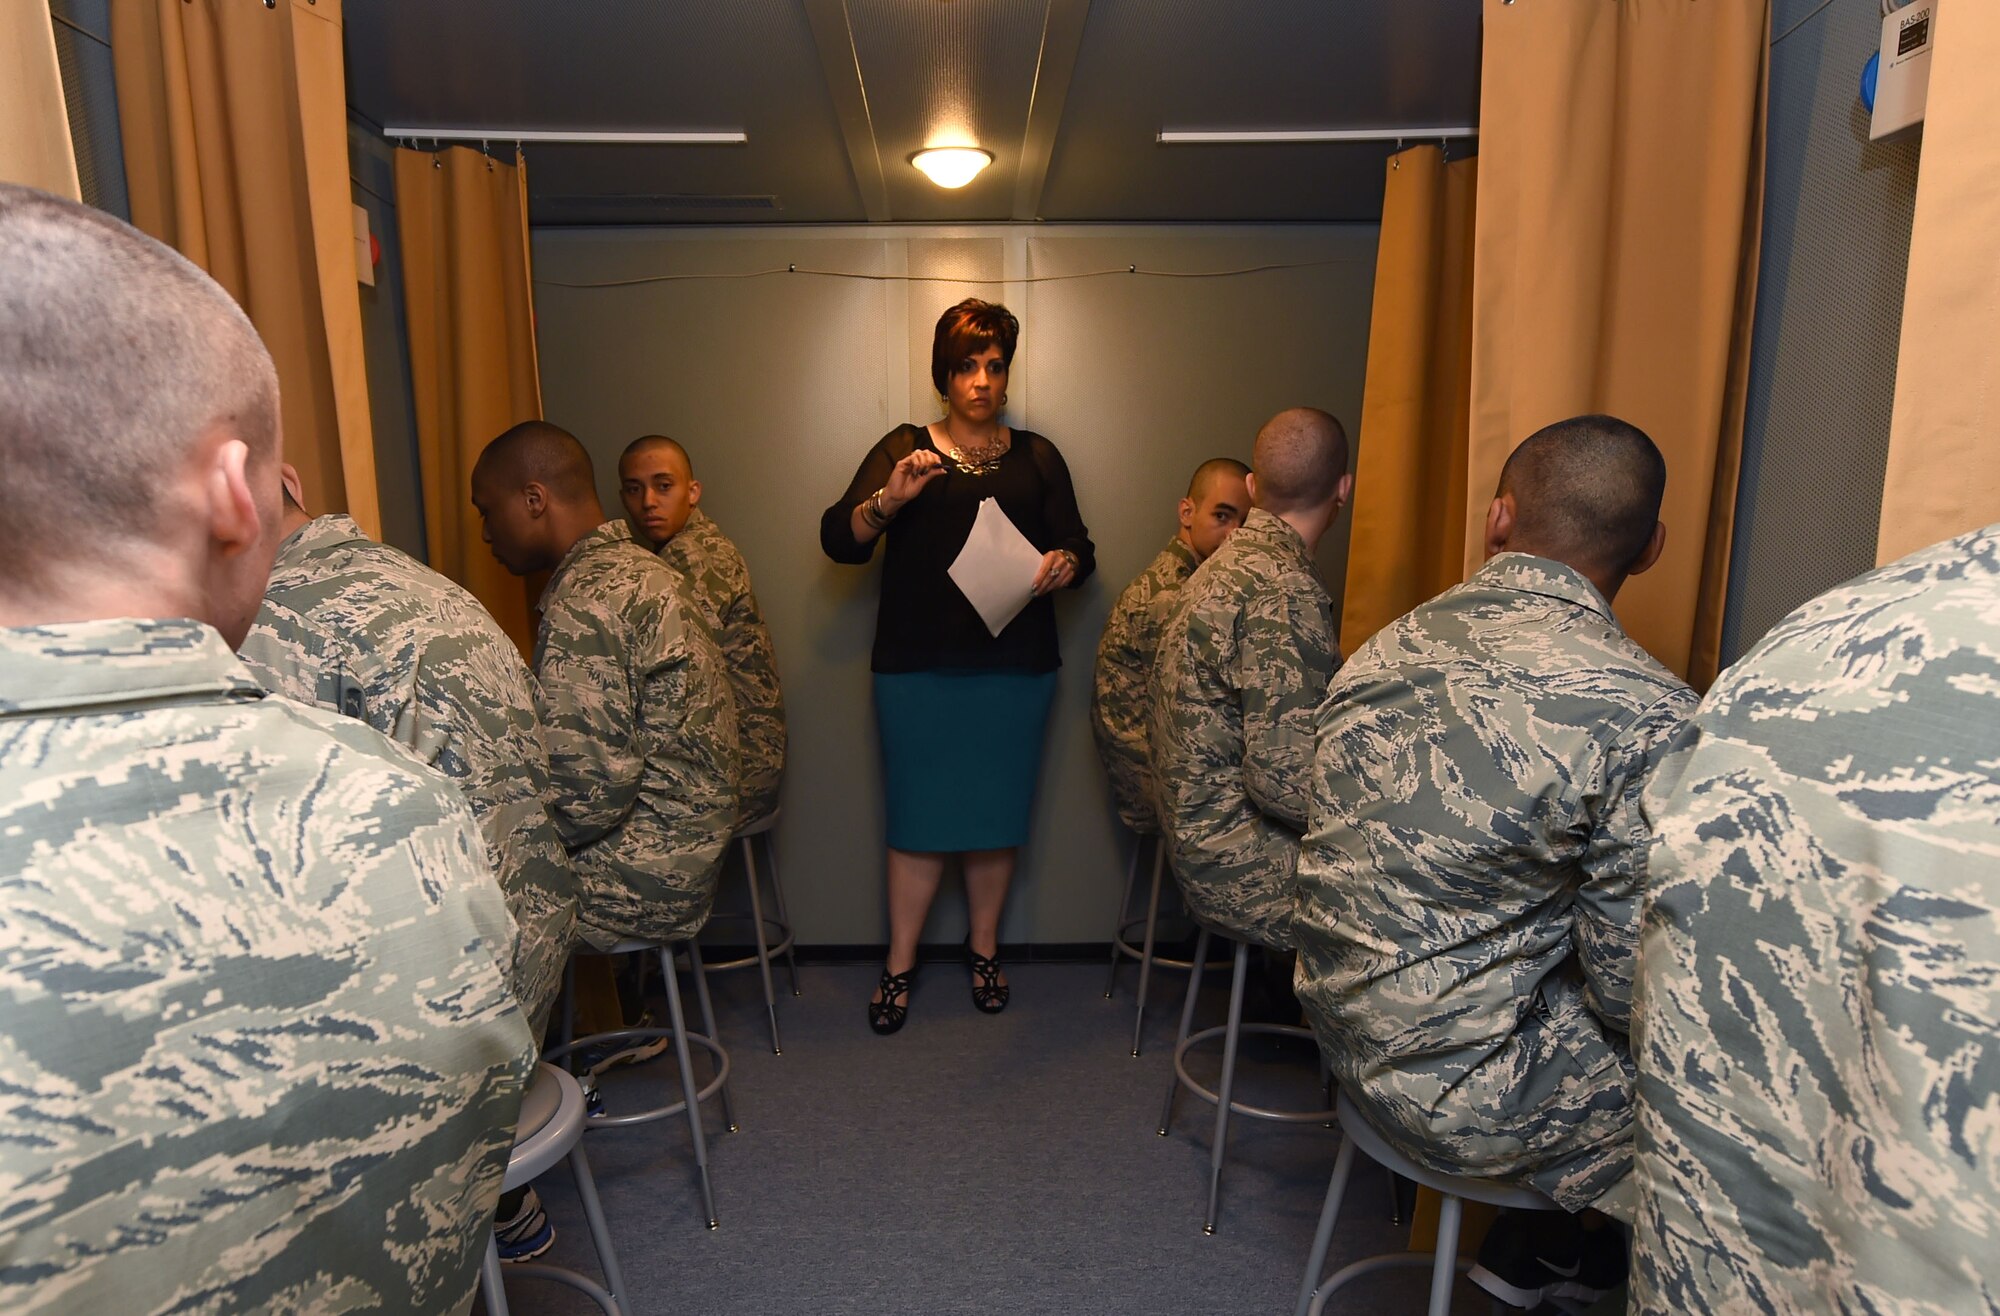 Carmen Puig-Martinez, audiology technician, instructs Basic Military Trainees of baseline hearing assessment procedures May 12, 2015, on Joint Base San Antonio-Lackland, Texas. The hearing assessment was created to provide an accurate hearing assessment of all recruits upon entering military service. (U.S. Air Force photo by Staff Sgt. Jerilyn Quintanilla)